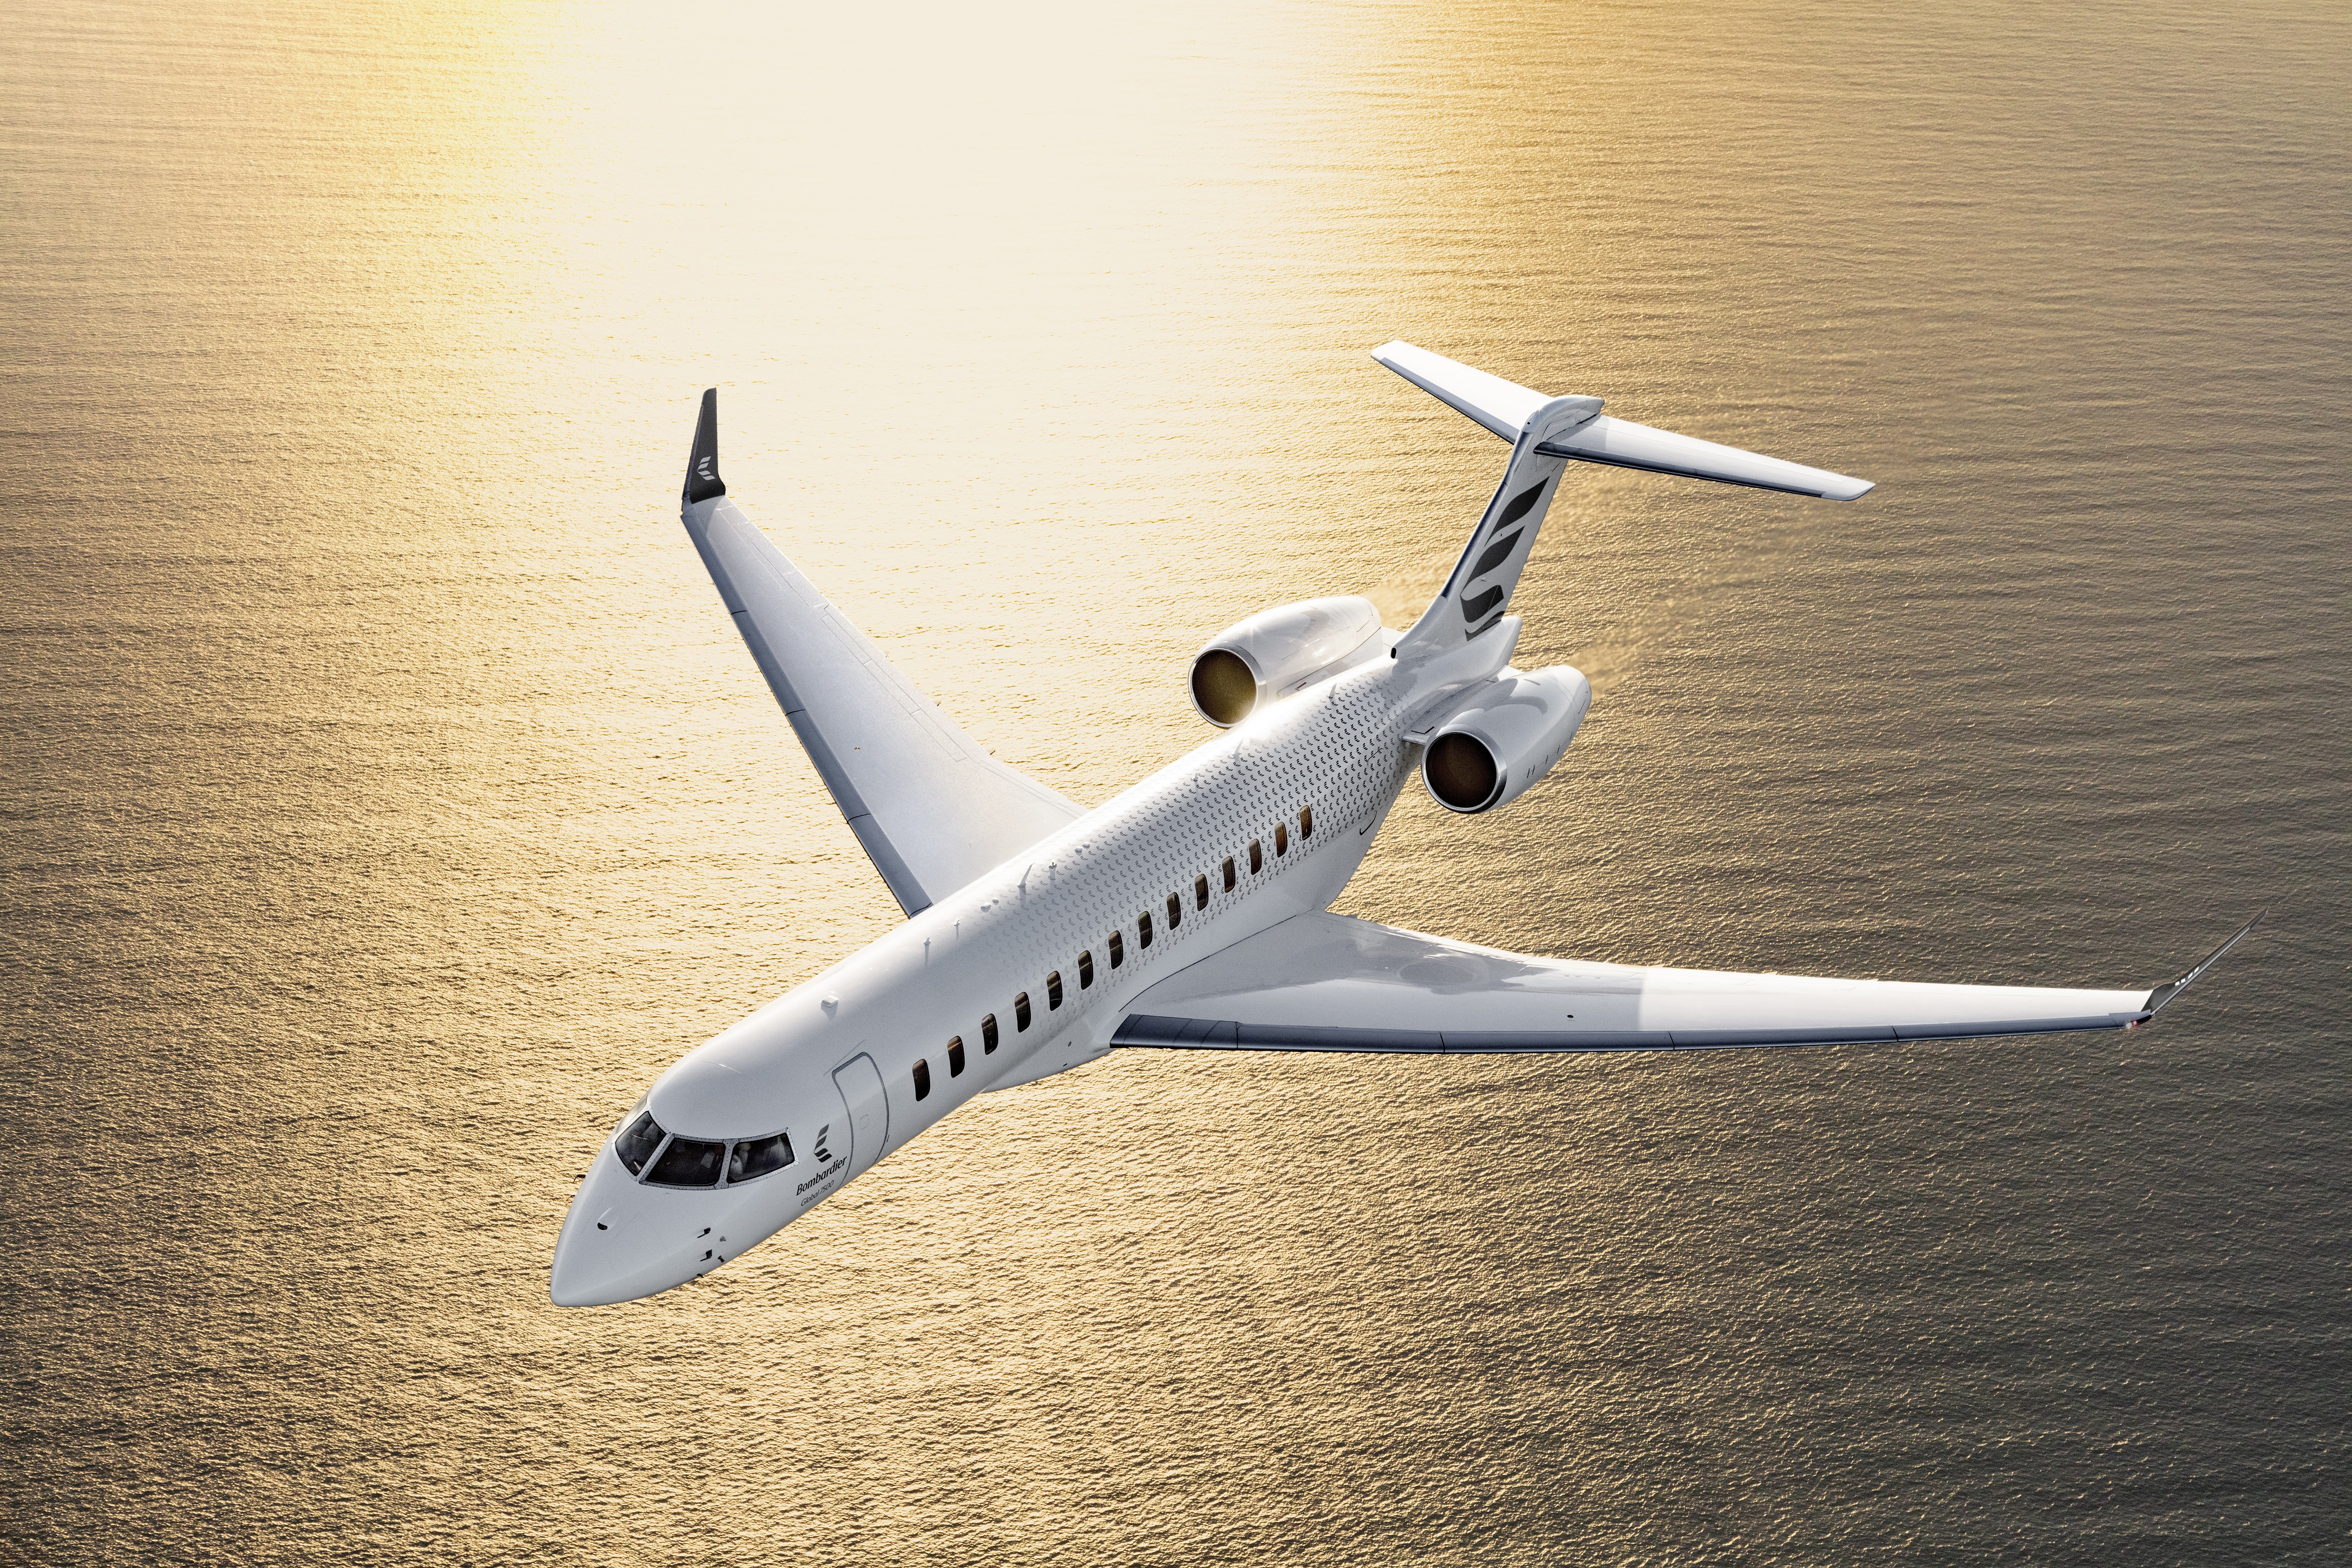 The Bombardier Global 7500 aircraft will be on display at the Catarina airshow, in Brazil